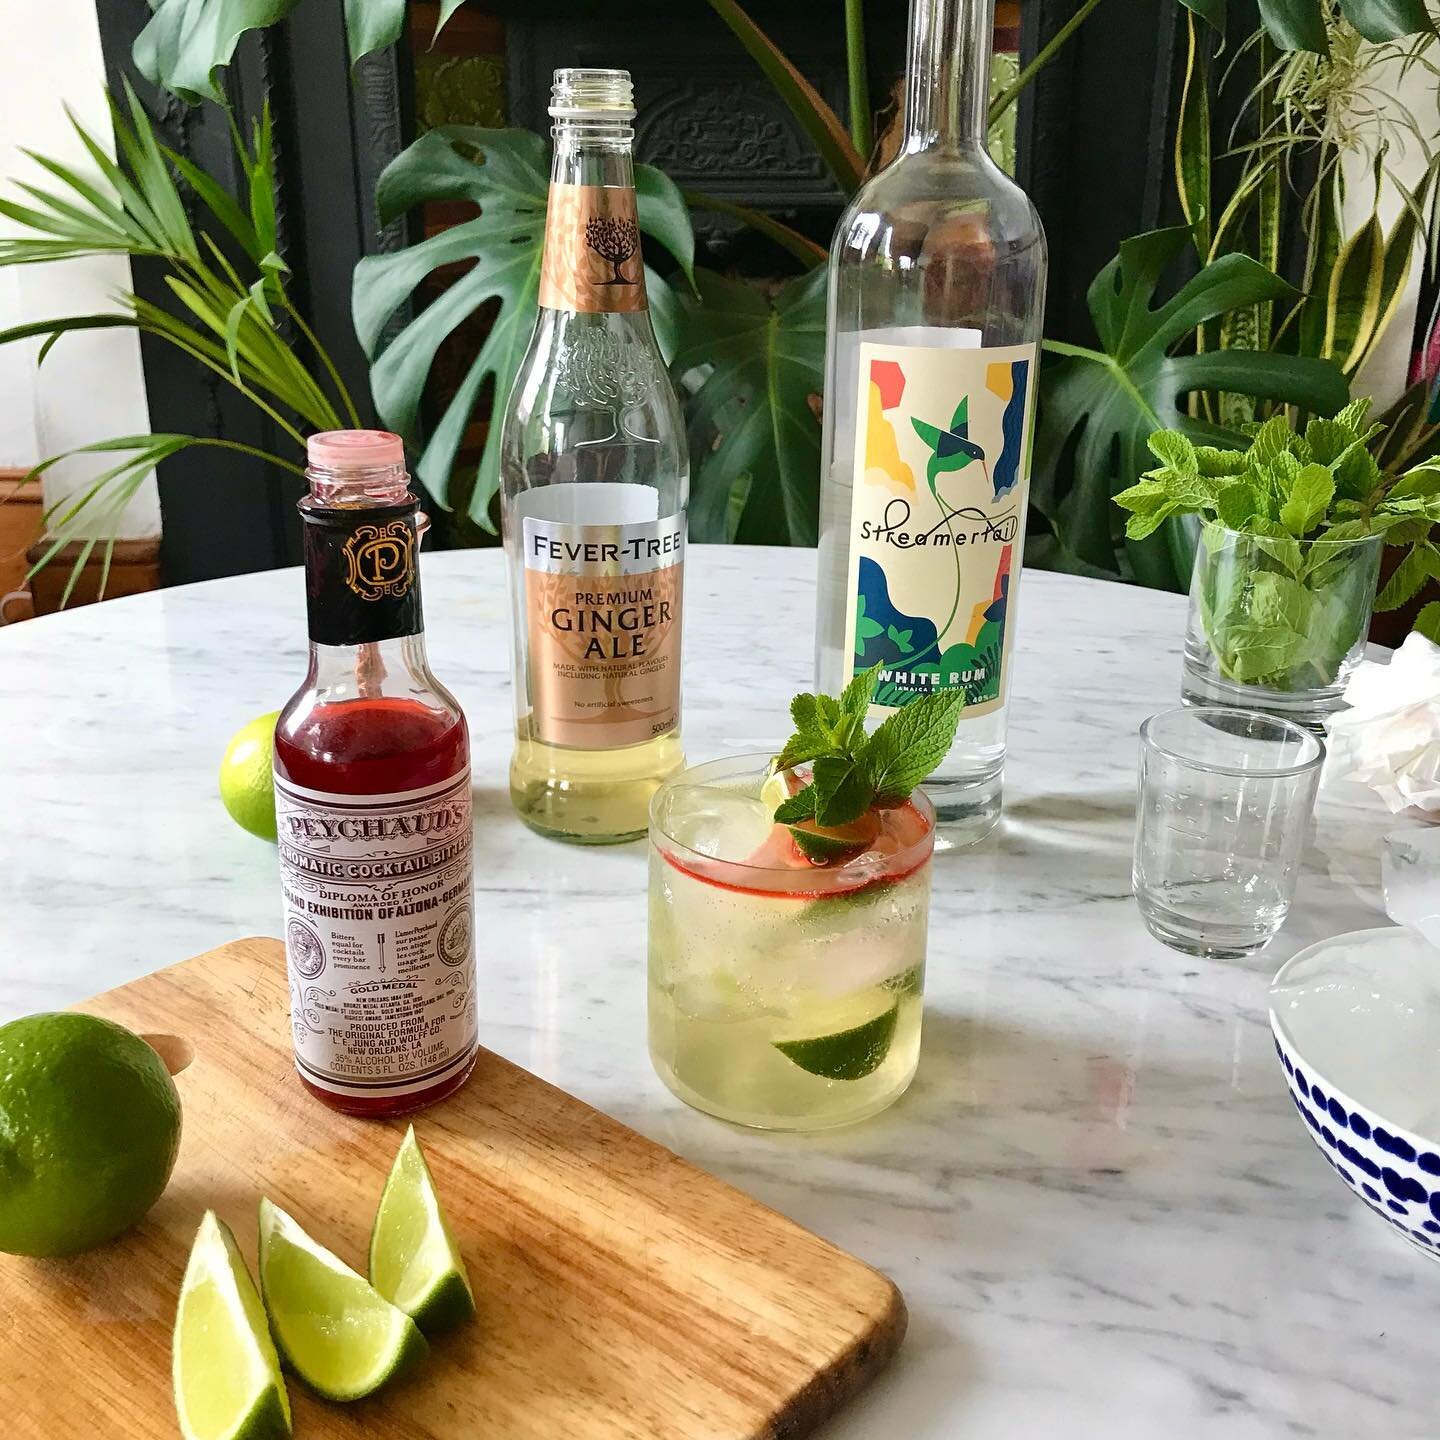 Bringing it home with a simple Streamertail and @fevertreemixers Ginger Ale. 
.
.
Stock up for the summer either online or at your local @bottleapostle 
.
.
#rum #rumandginger #cocktails #homebartender #simplecocktails #simplecocktail #drinks #summer